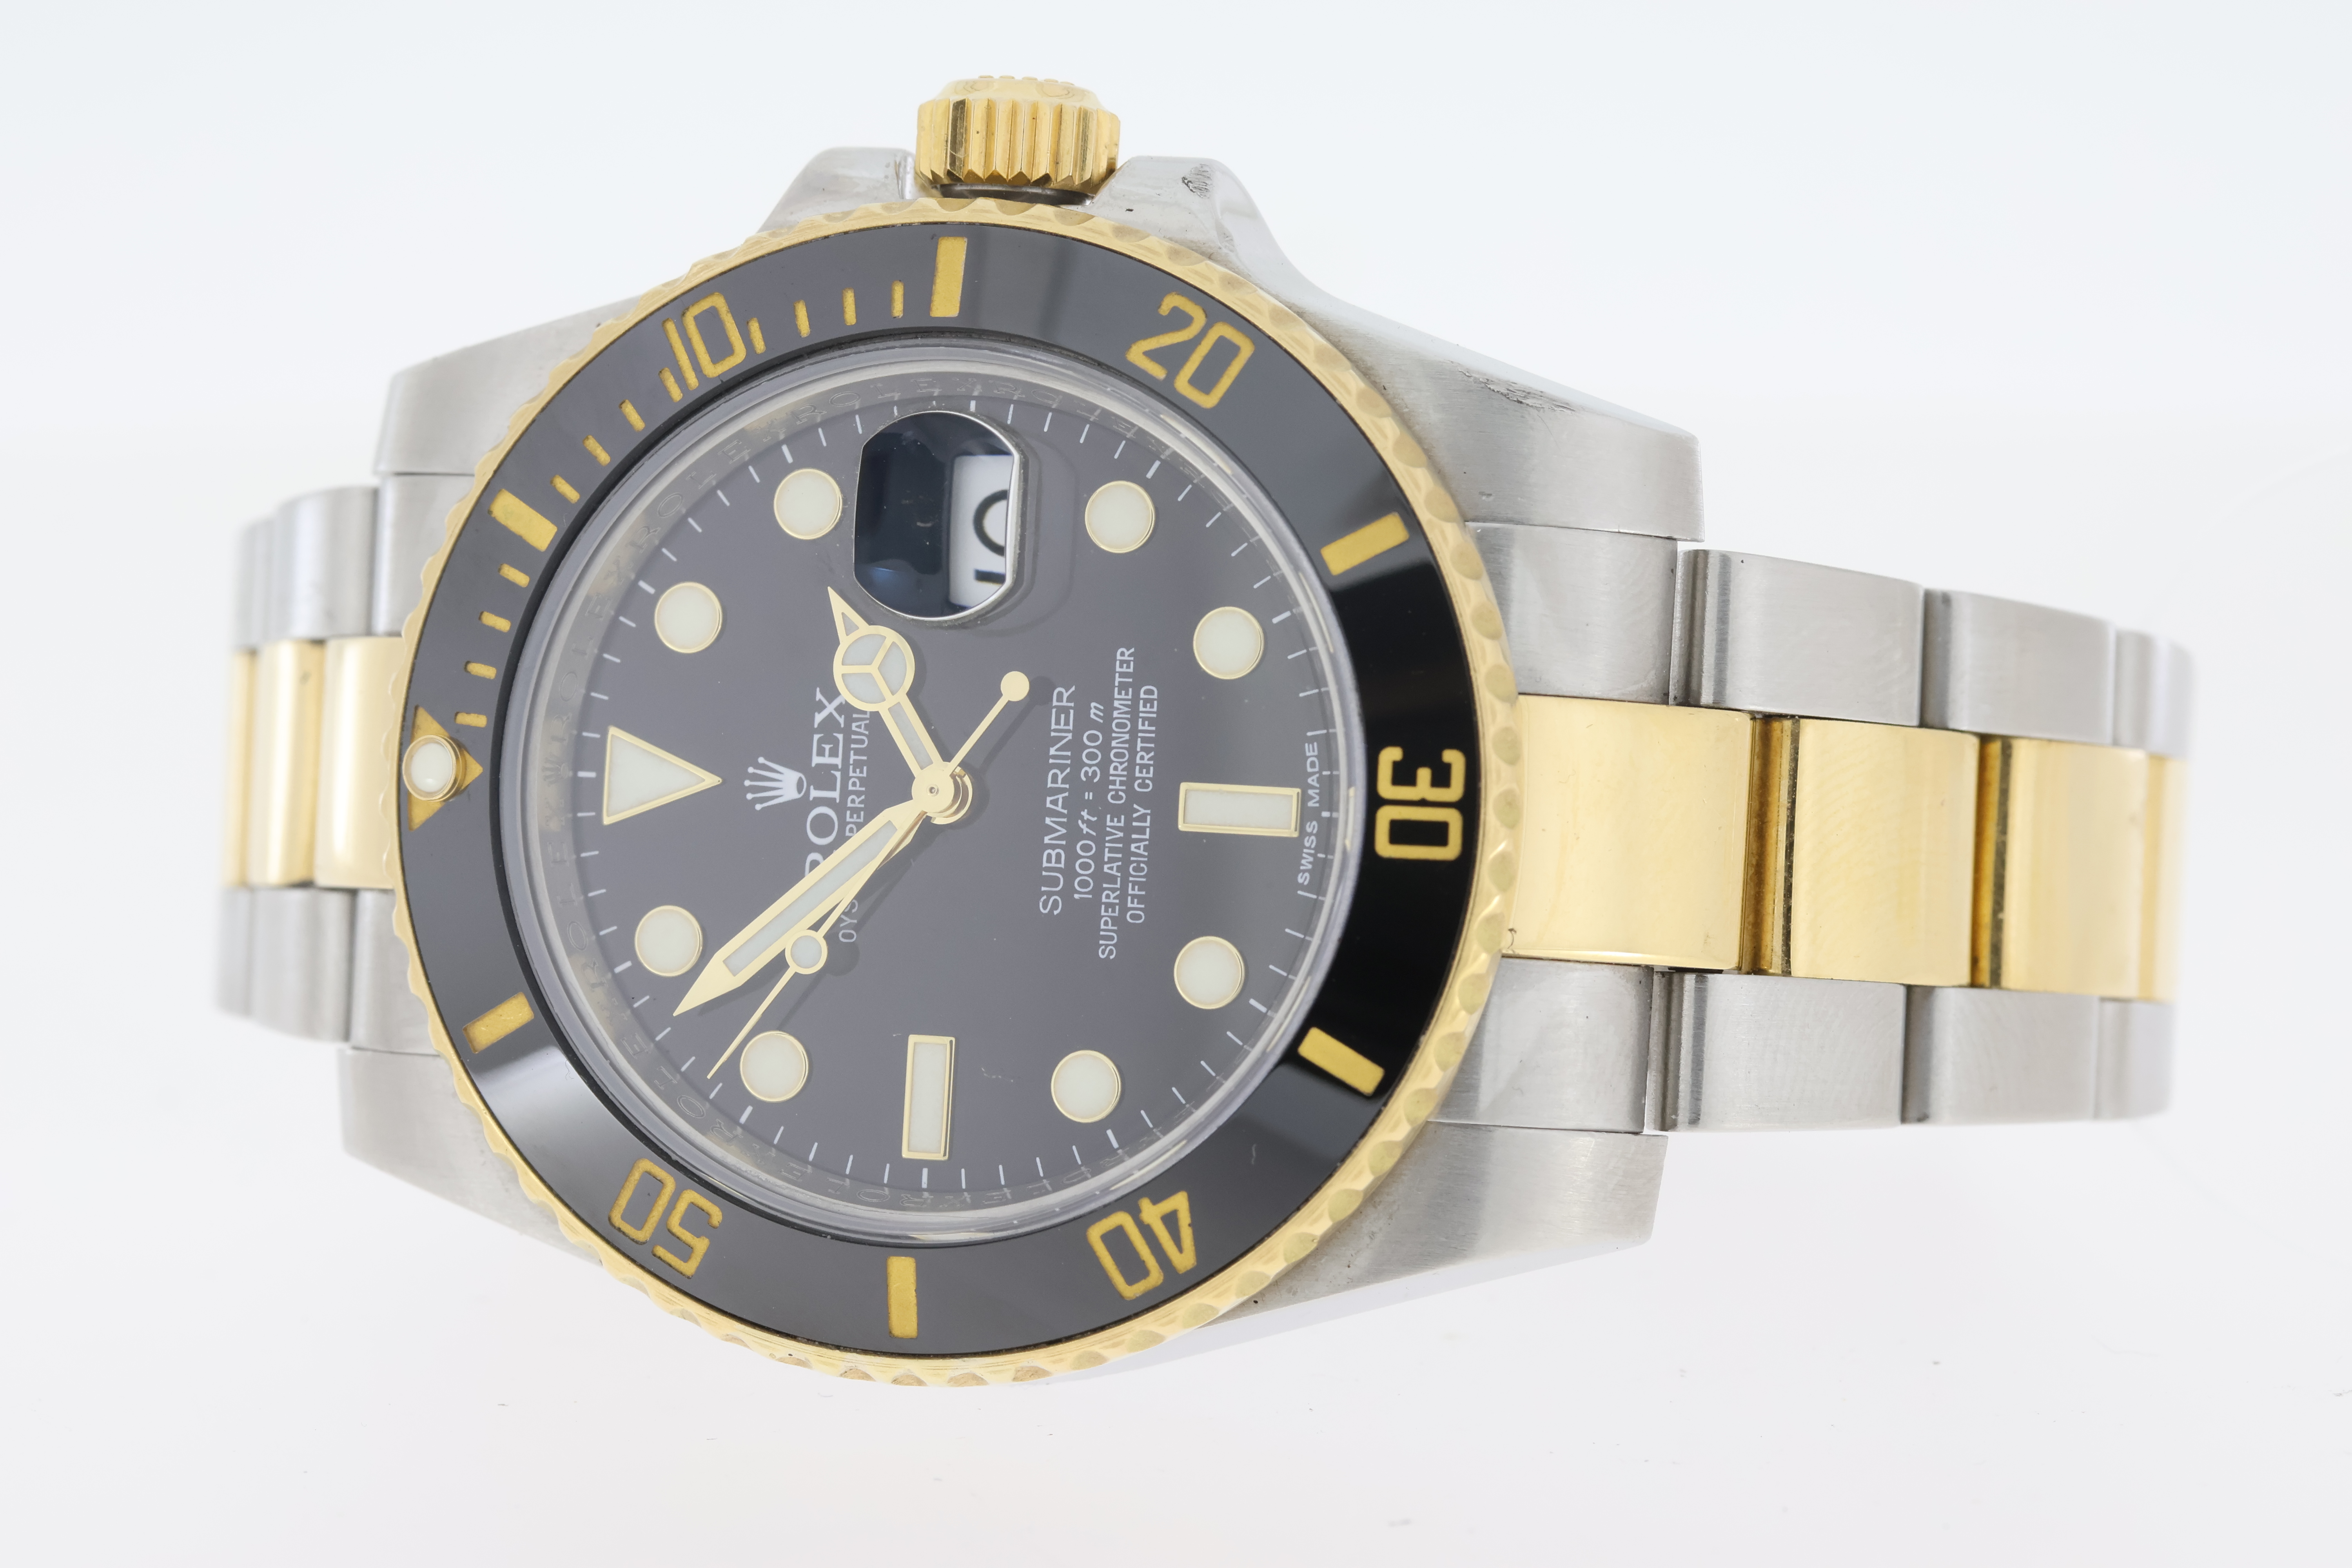 Rolex Submariner Date Reference 116613LN Steel and Gold - Image 4 of 8